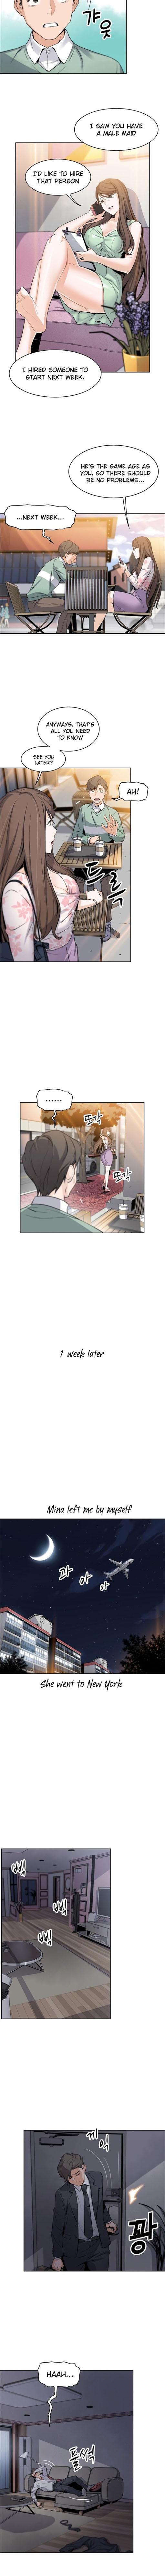 Housekeeper [Neck Pillow, Paper] Ch.49/49 [English] [Manhwa PDF] Completed 80